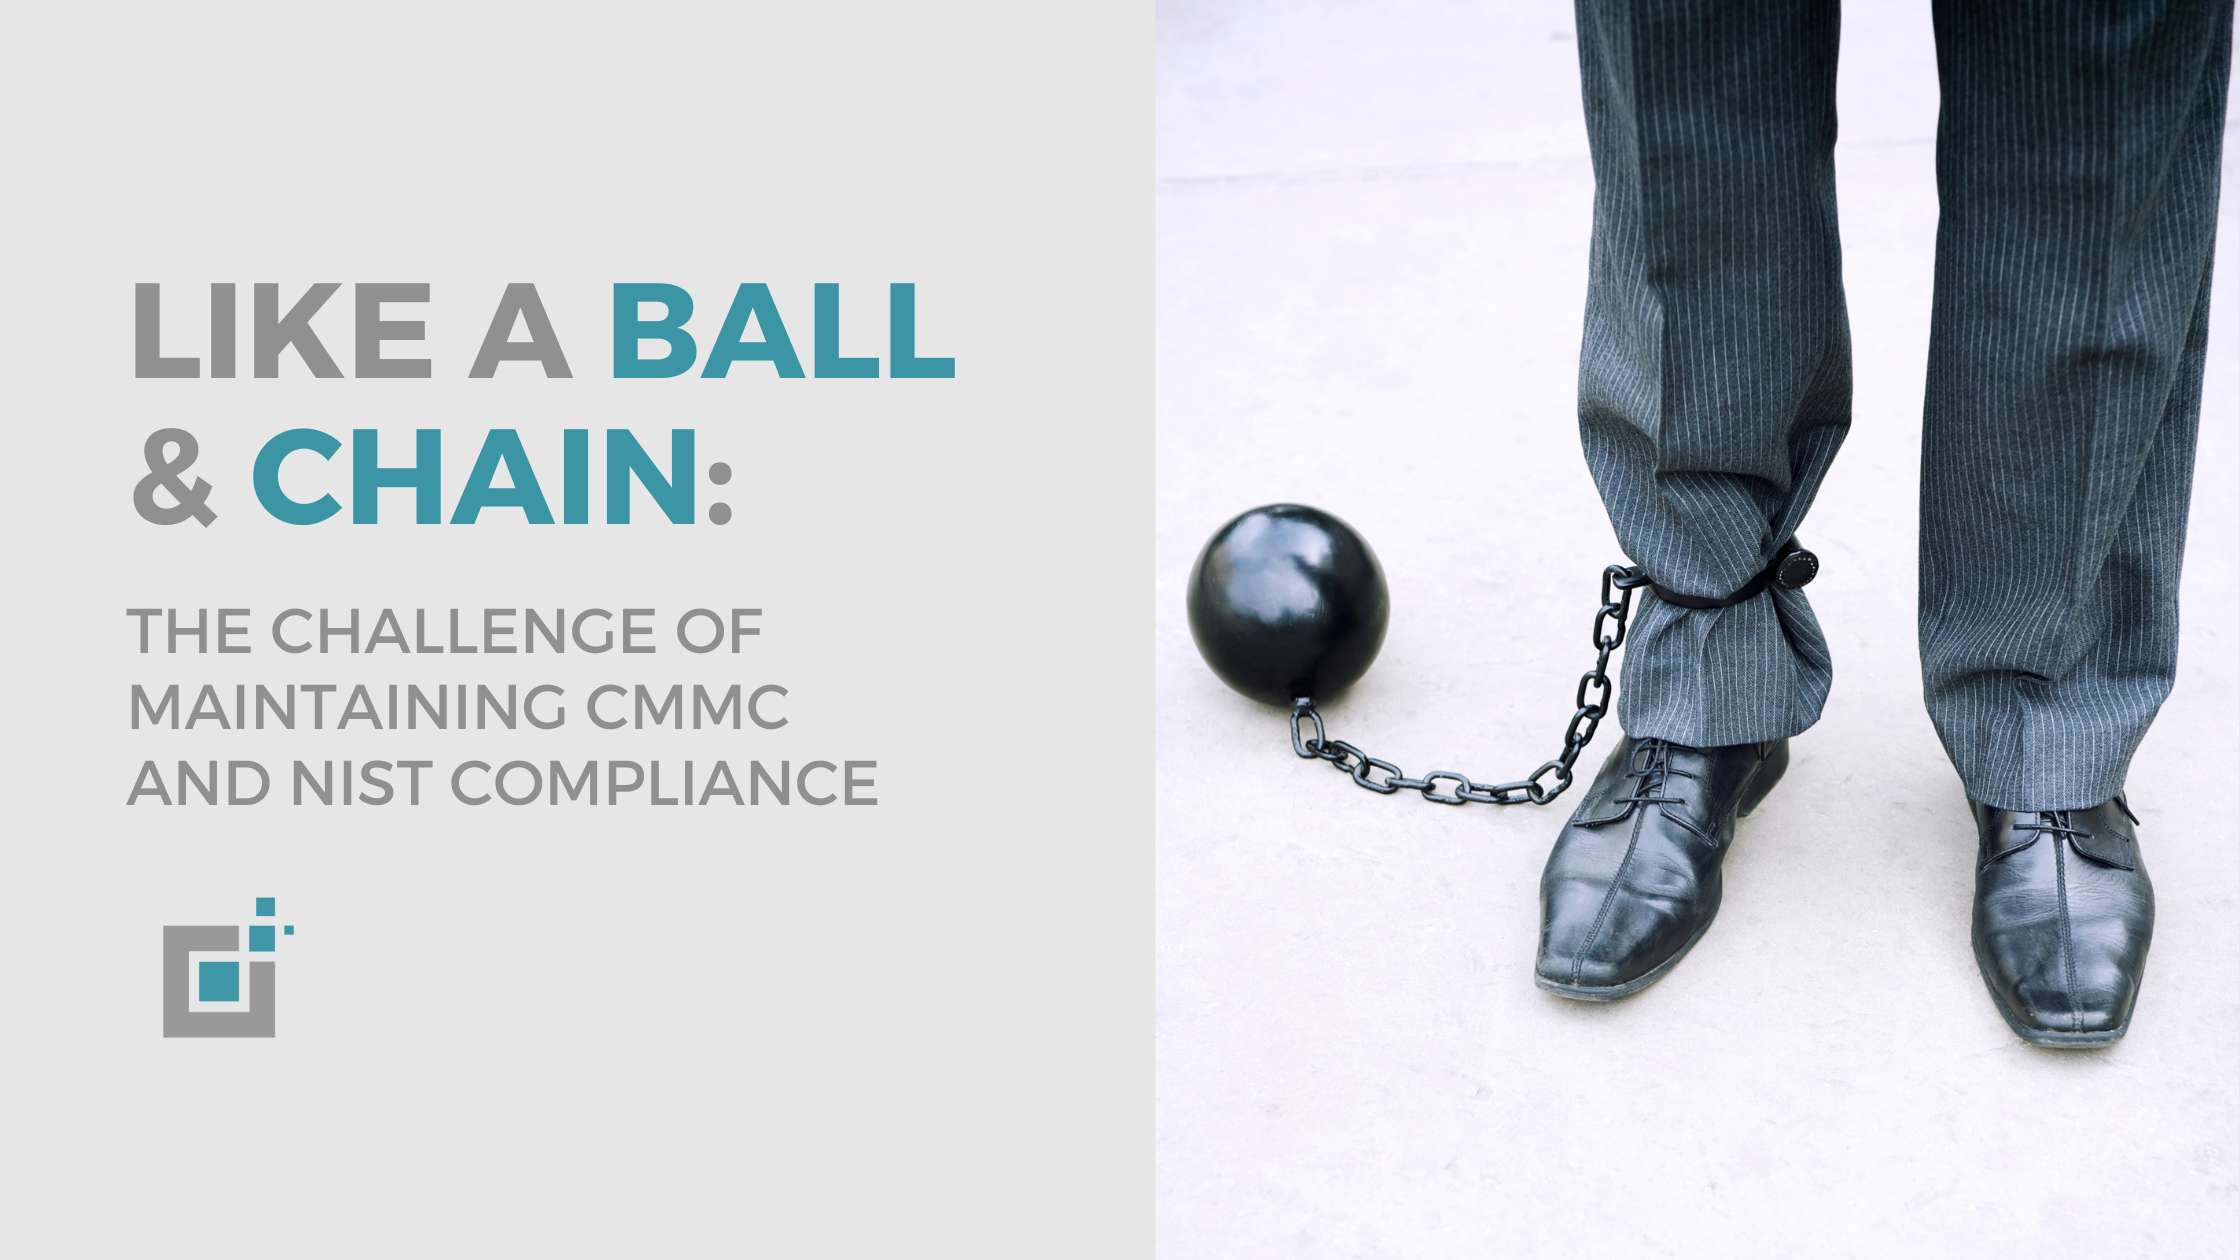 Like a ball and chain: the challenge of maintaining CMMC and NIST compliance.